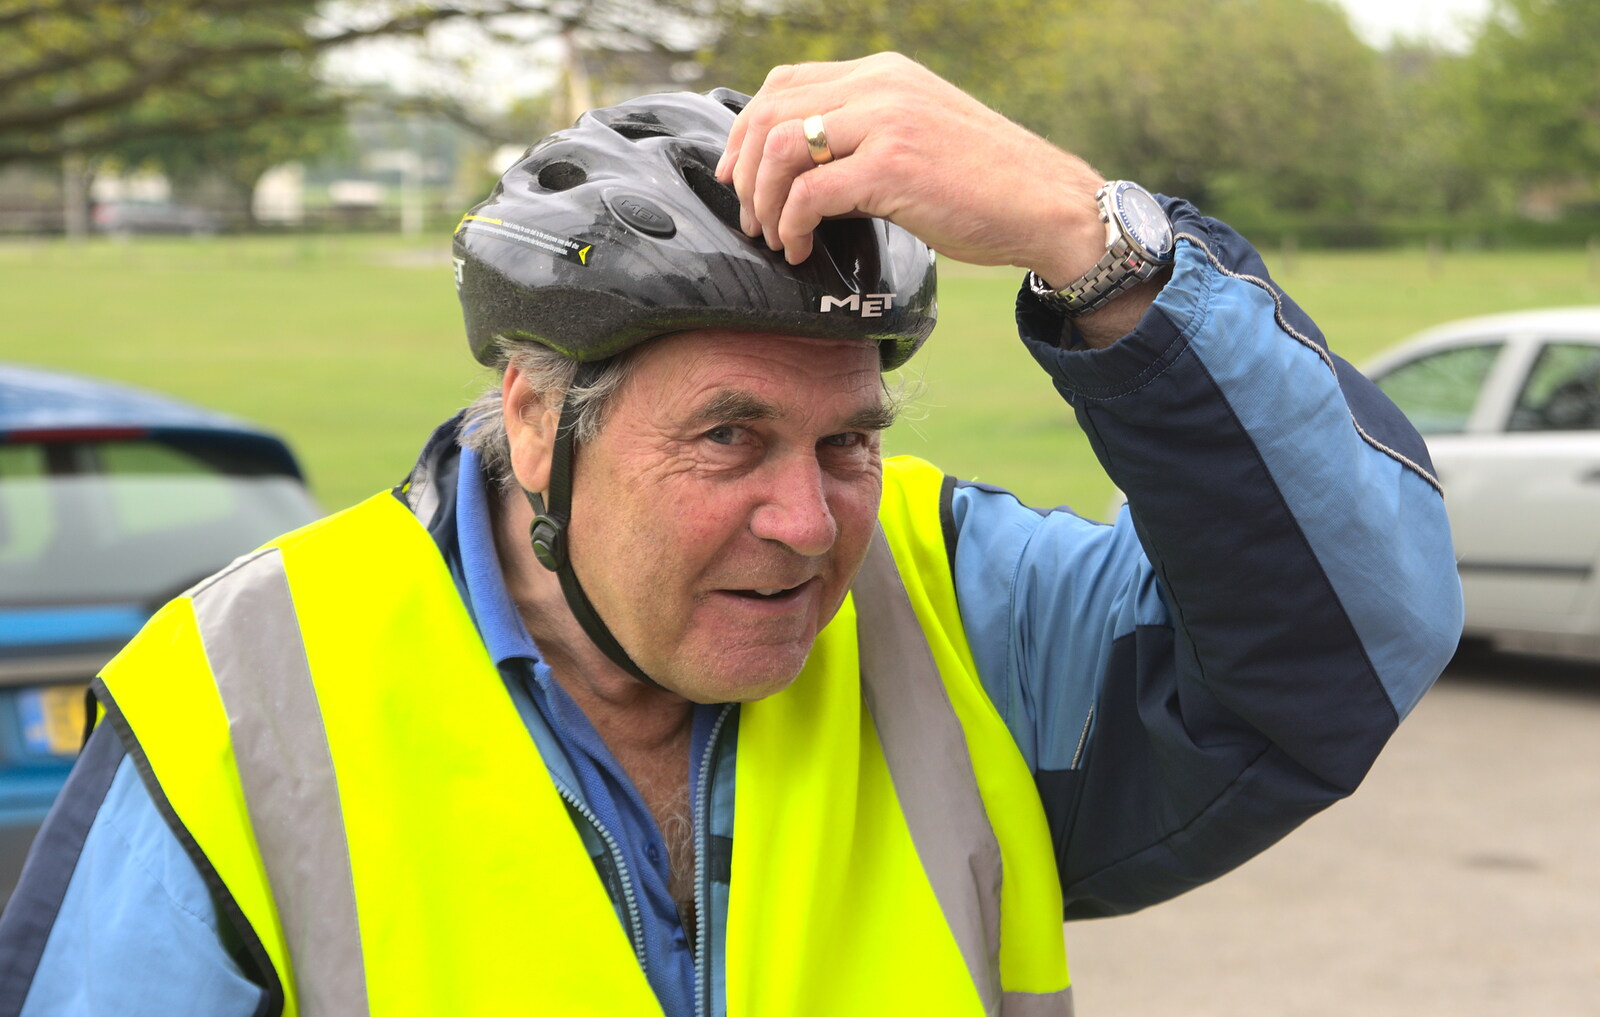 Alan checks that his helmet is on from The Last-Ever BSCC Weekend Away Bike Ride, Thaxted, Essex - 6th May 2017